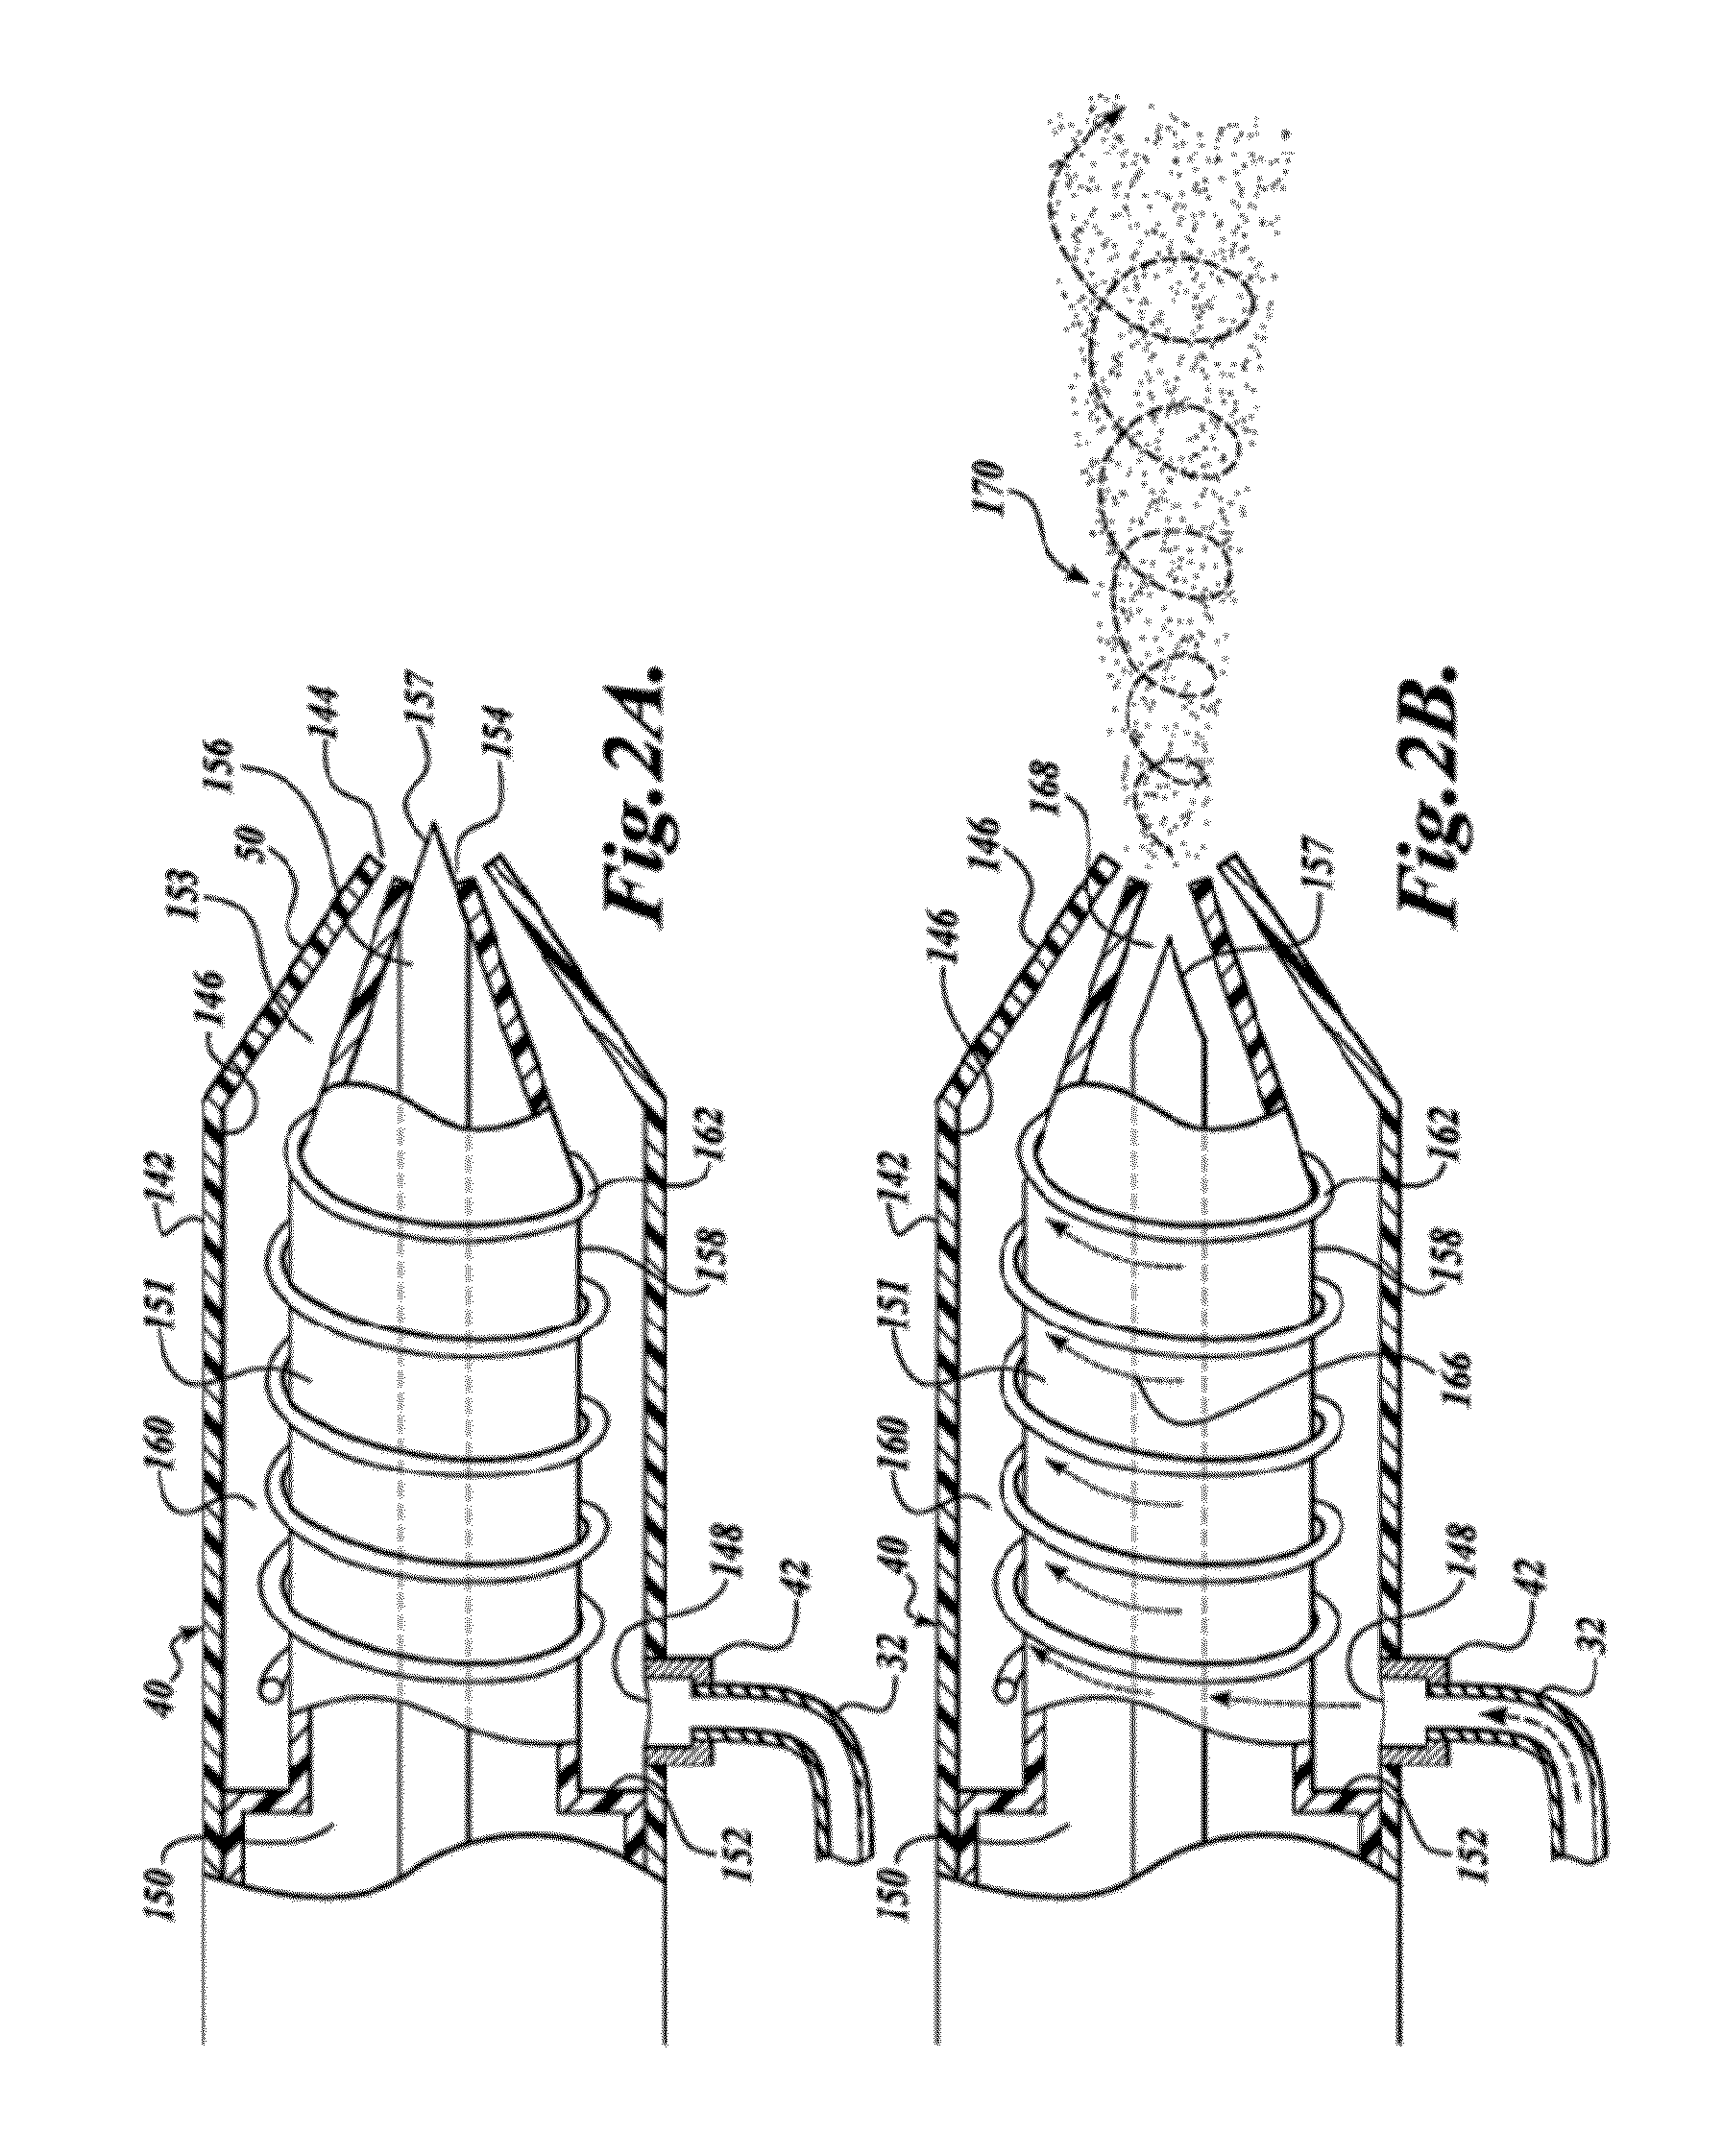 Circumferential Aerosol Device for Delivering Drugs to Olfactory Epithelium and Brain